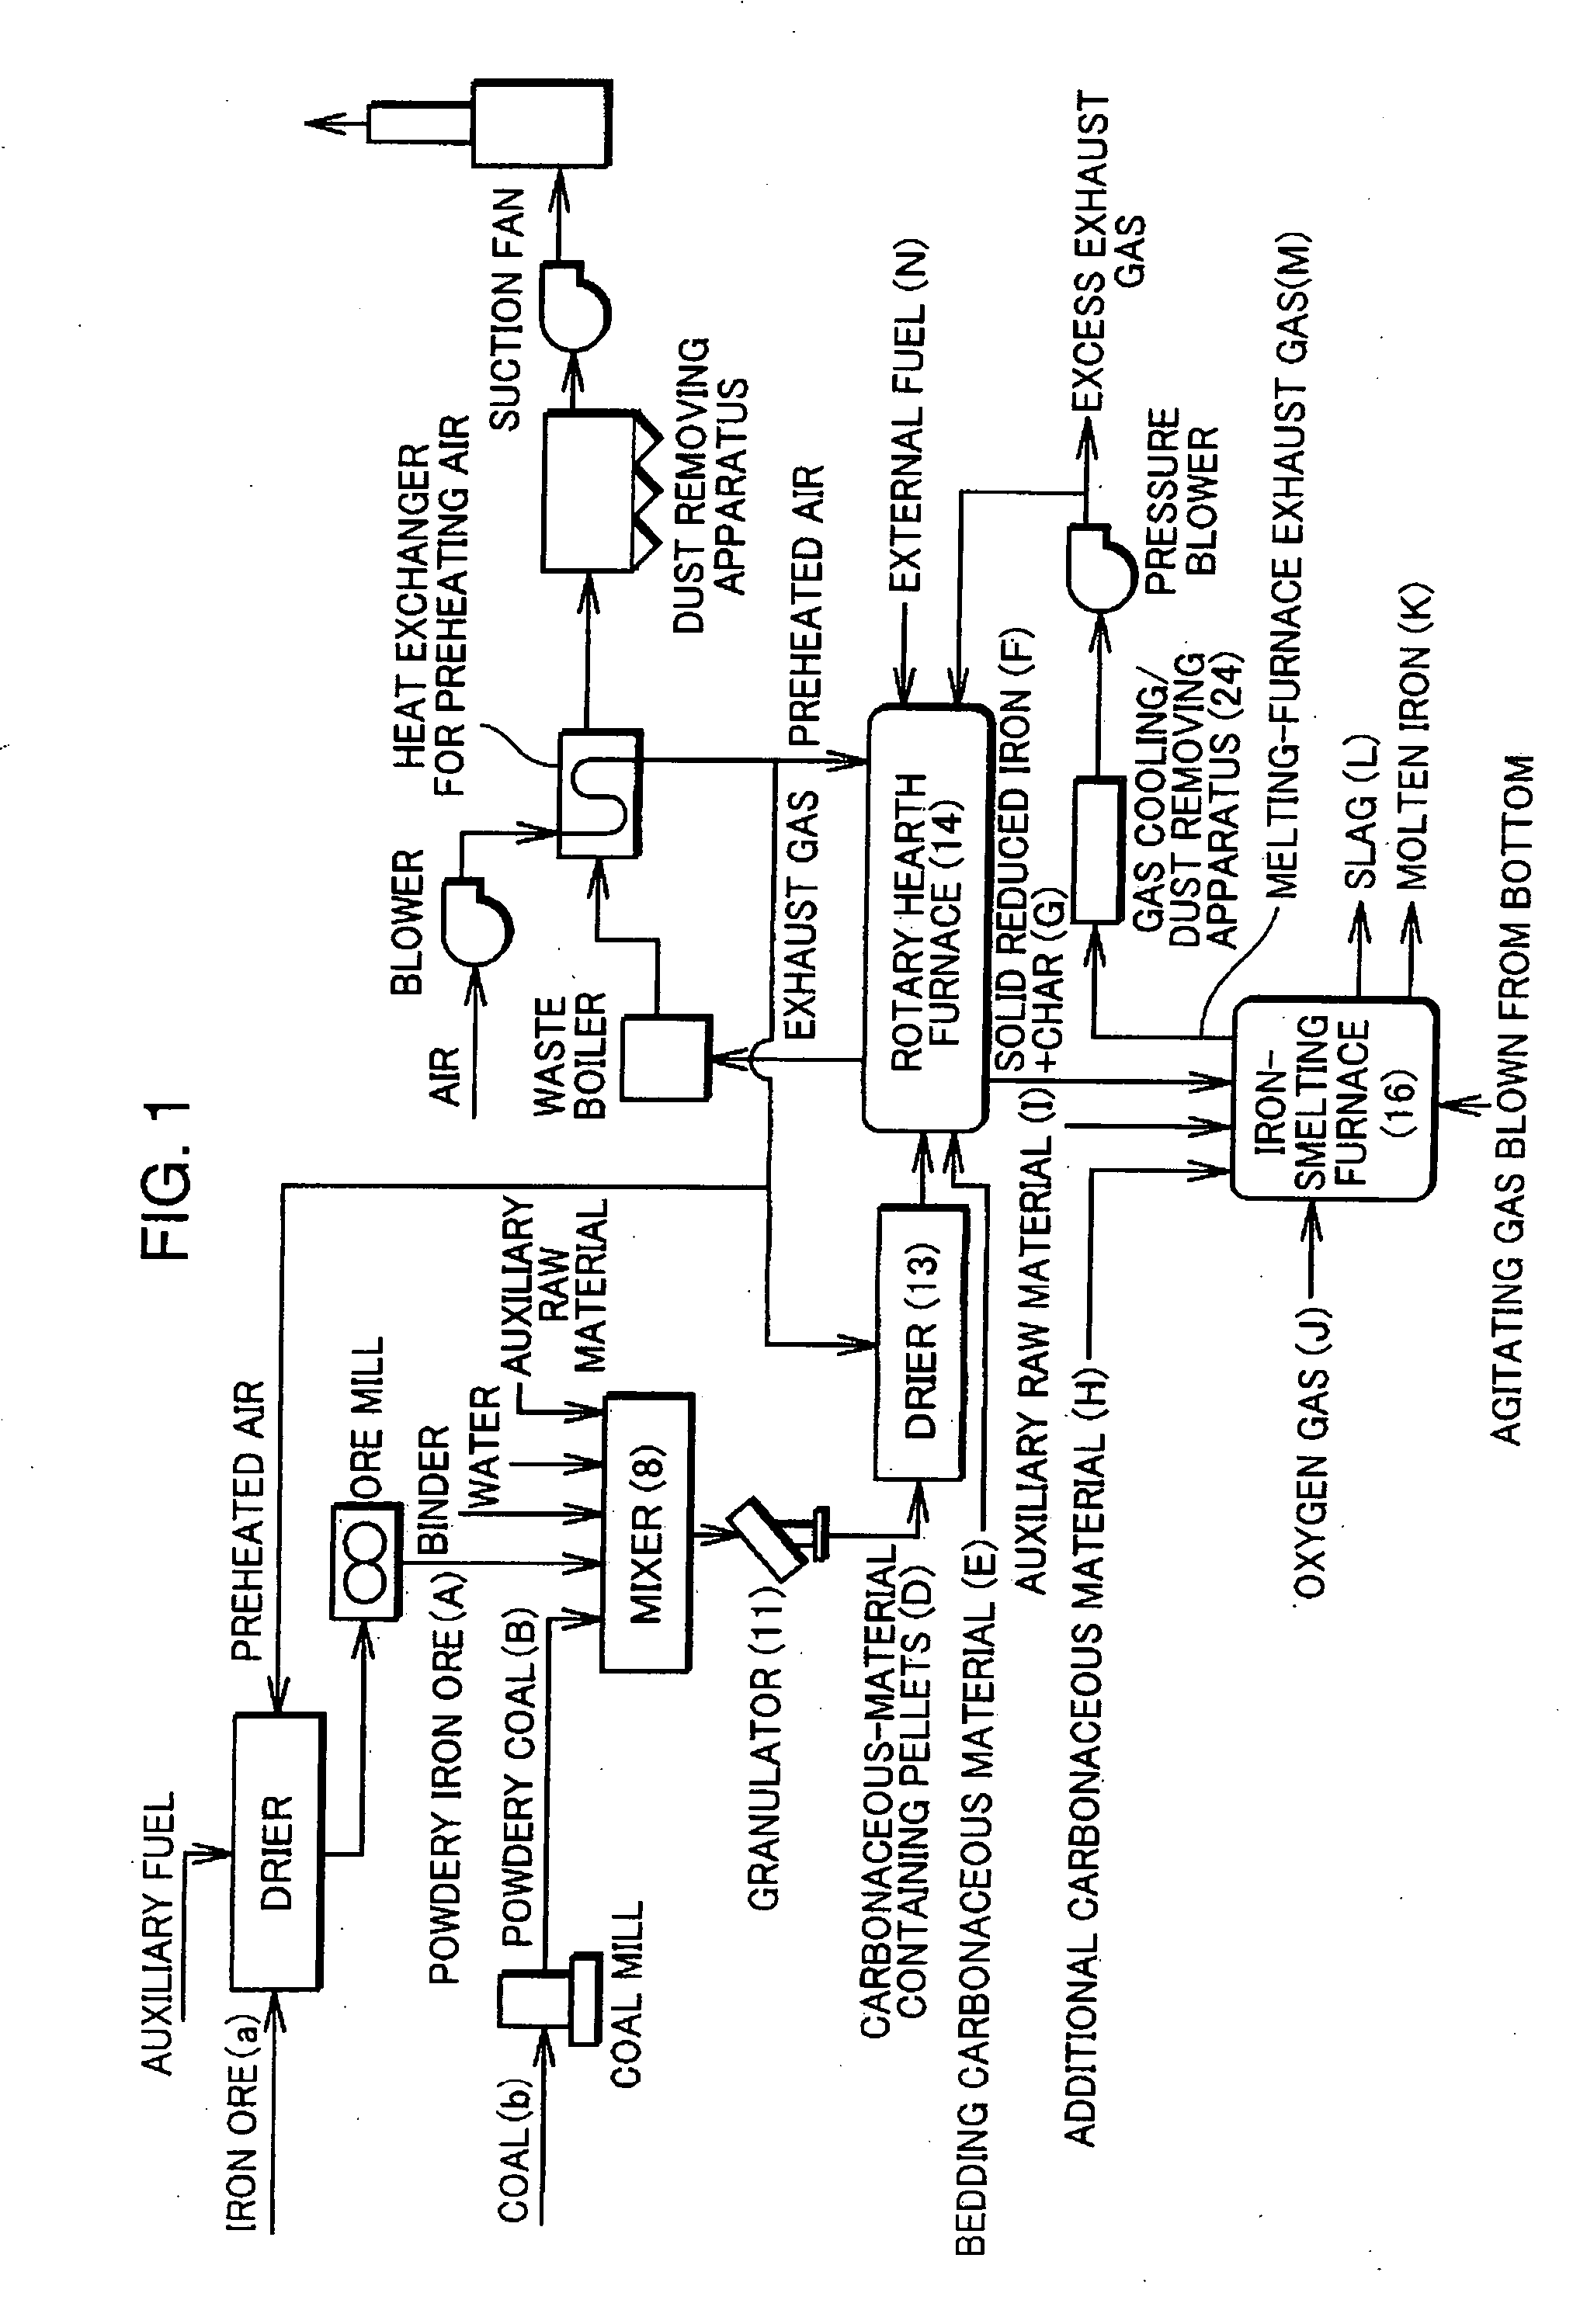 Process for Producing Molten Iron and Apparatus Therefor